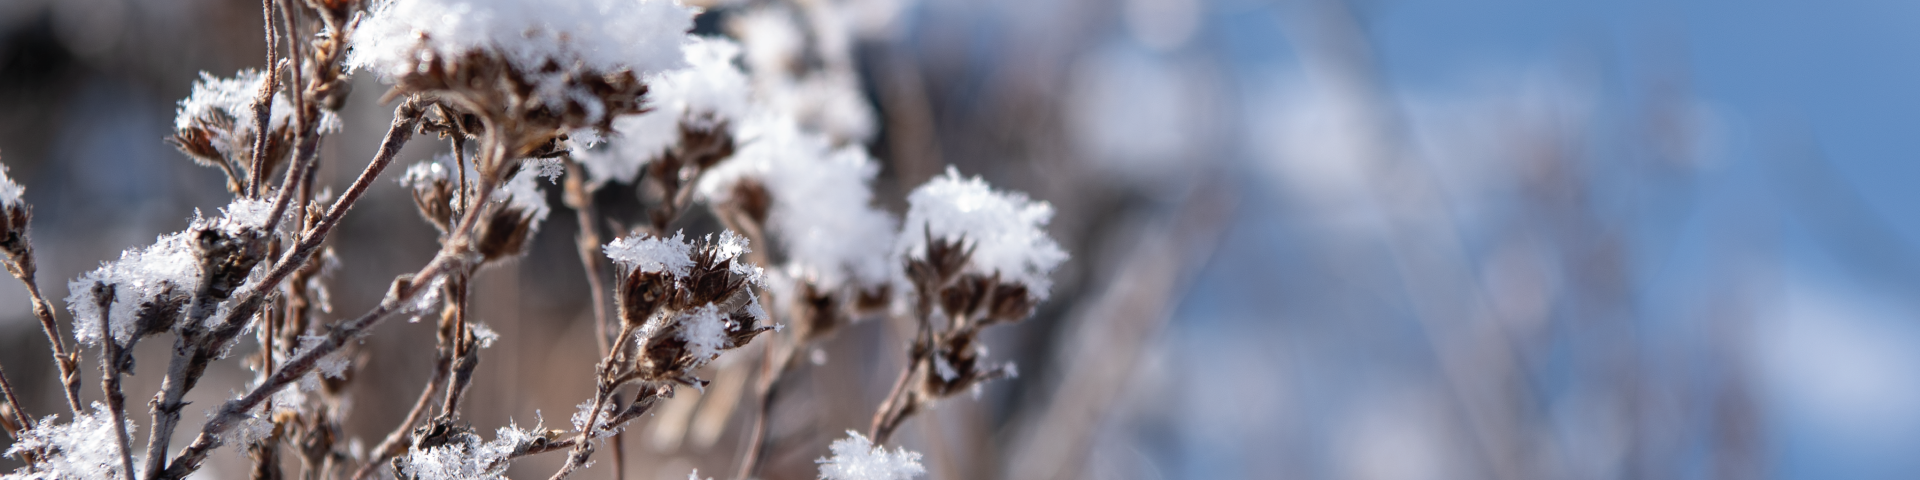 Frost covered grasses